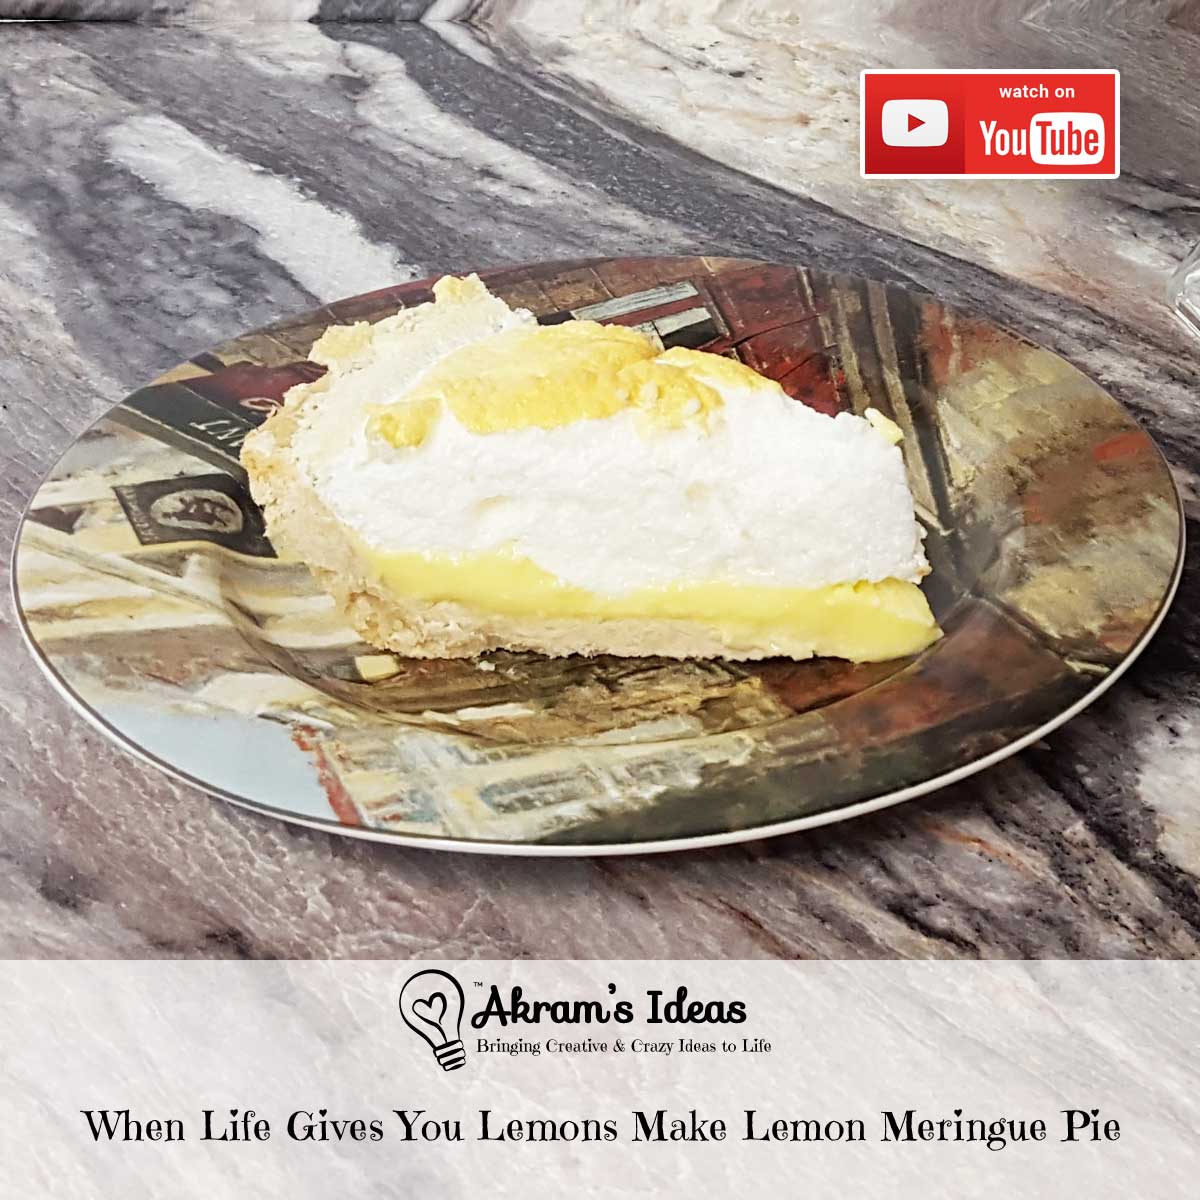 Learn how to make the perfect Lemon Meringue Pie with this easy how-to video tutorial.